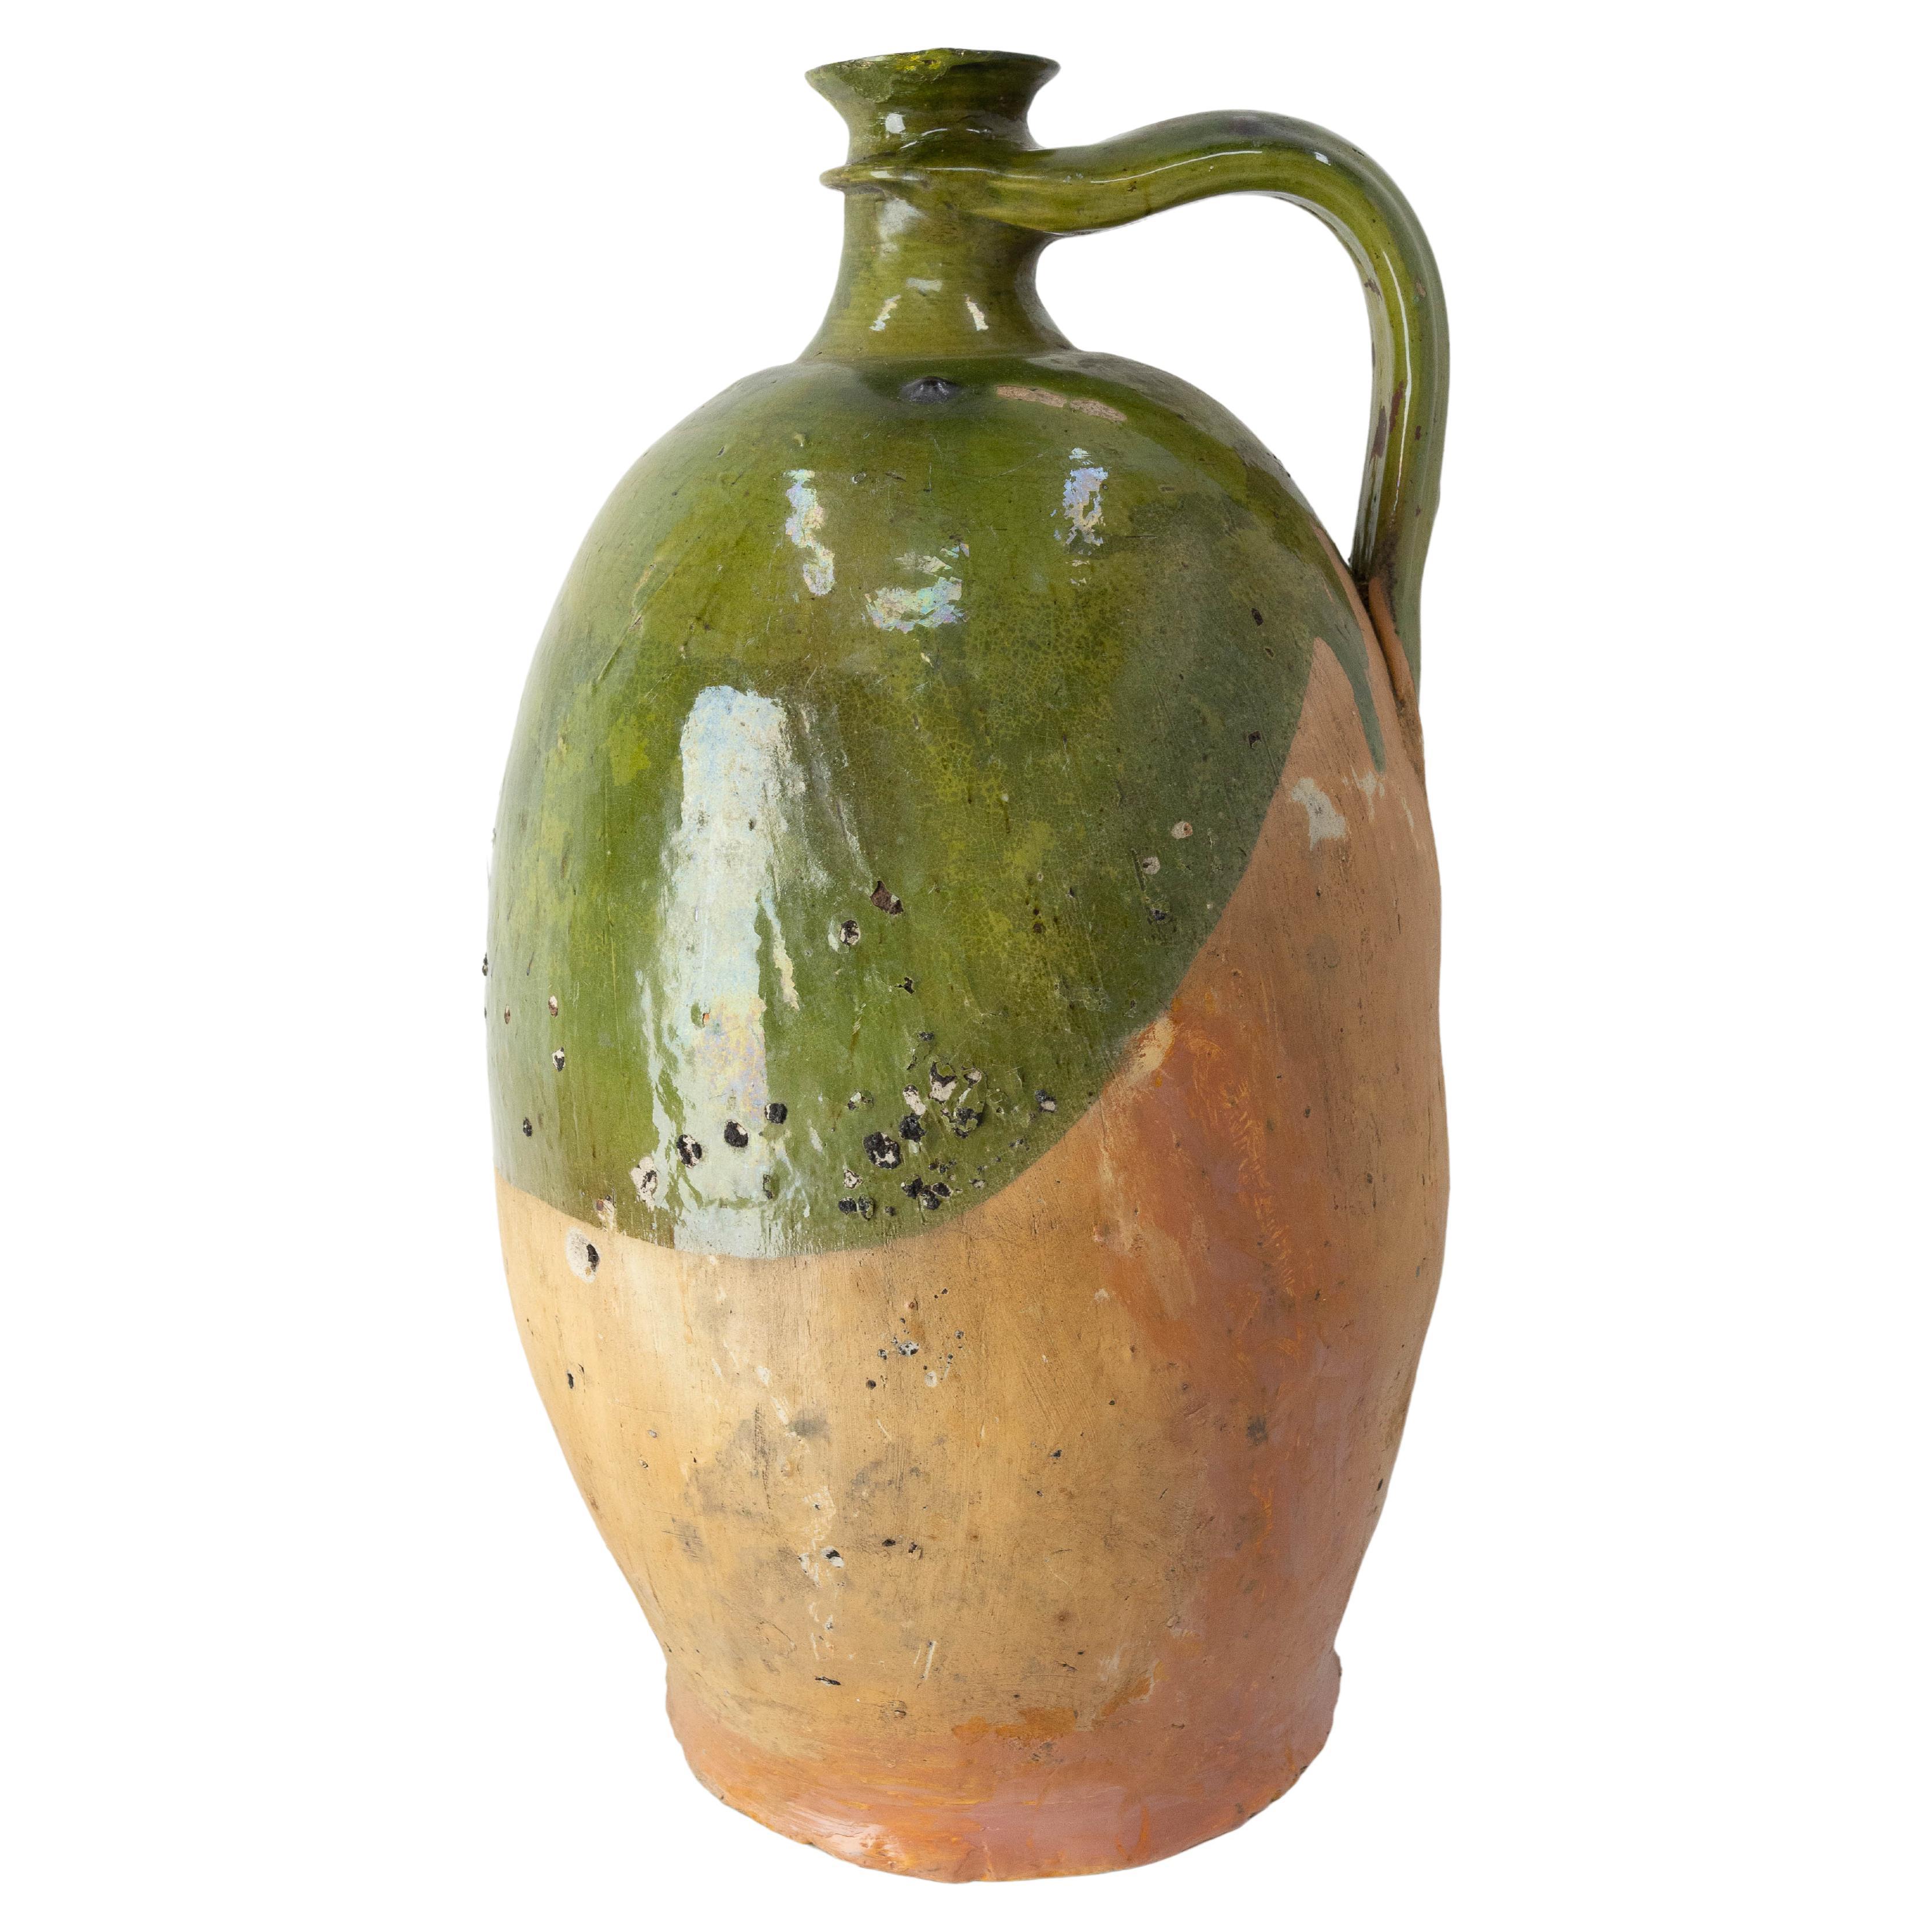 South of France Provencal Oil Jar Terracotta with Green Glaze, 19th Century For Sale